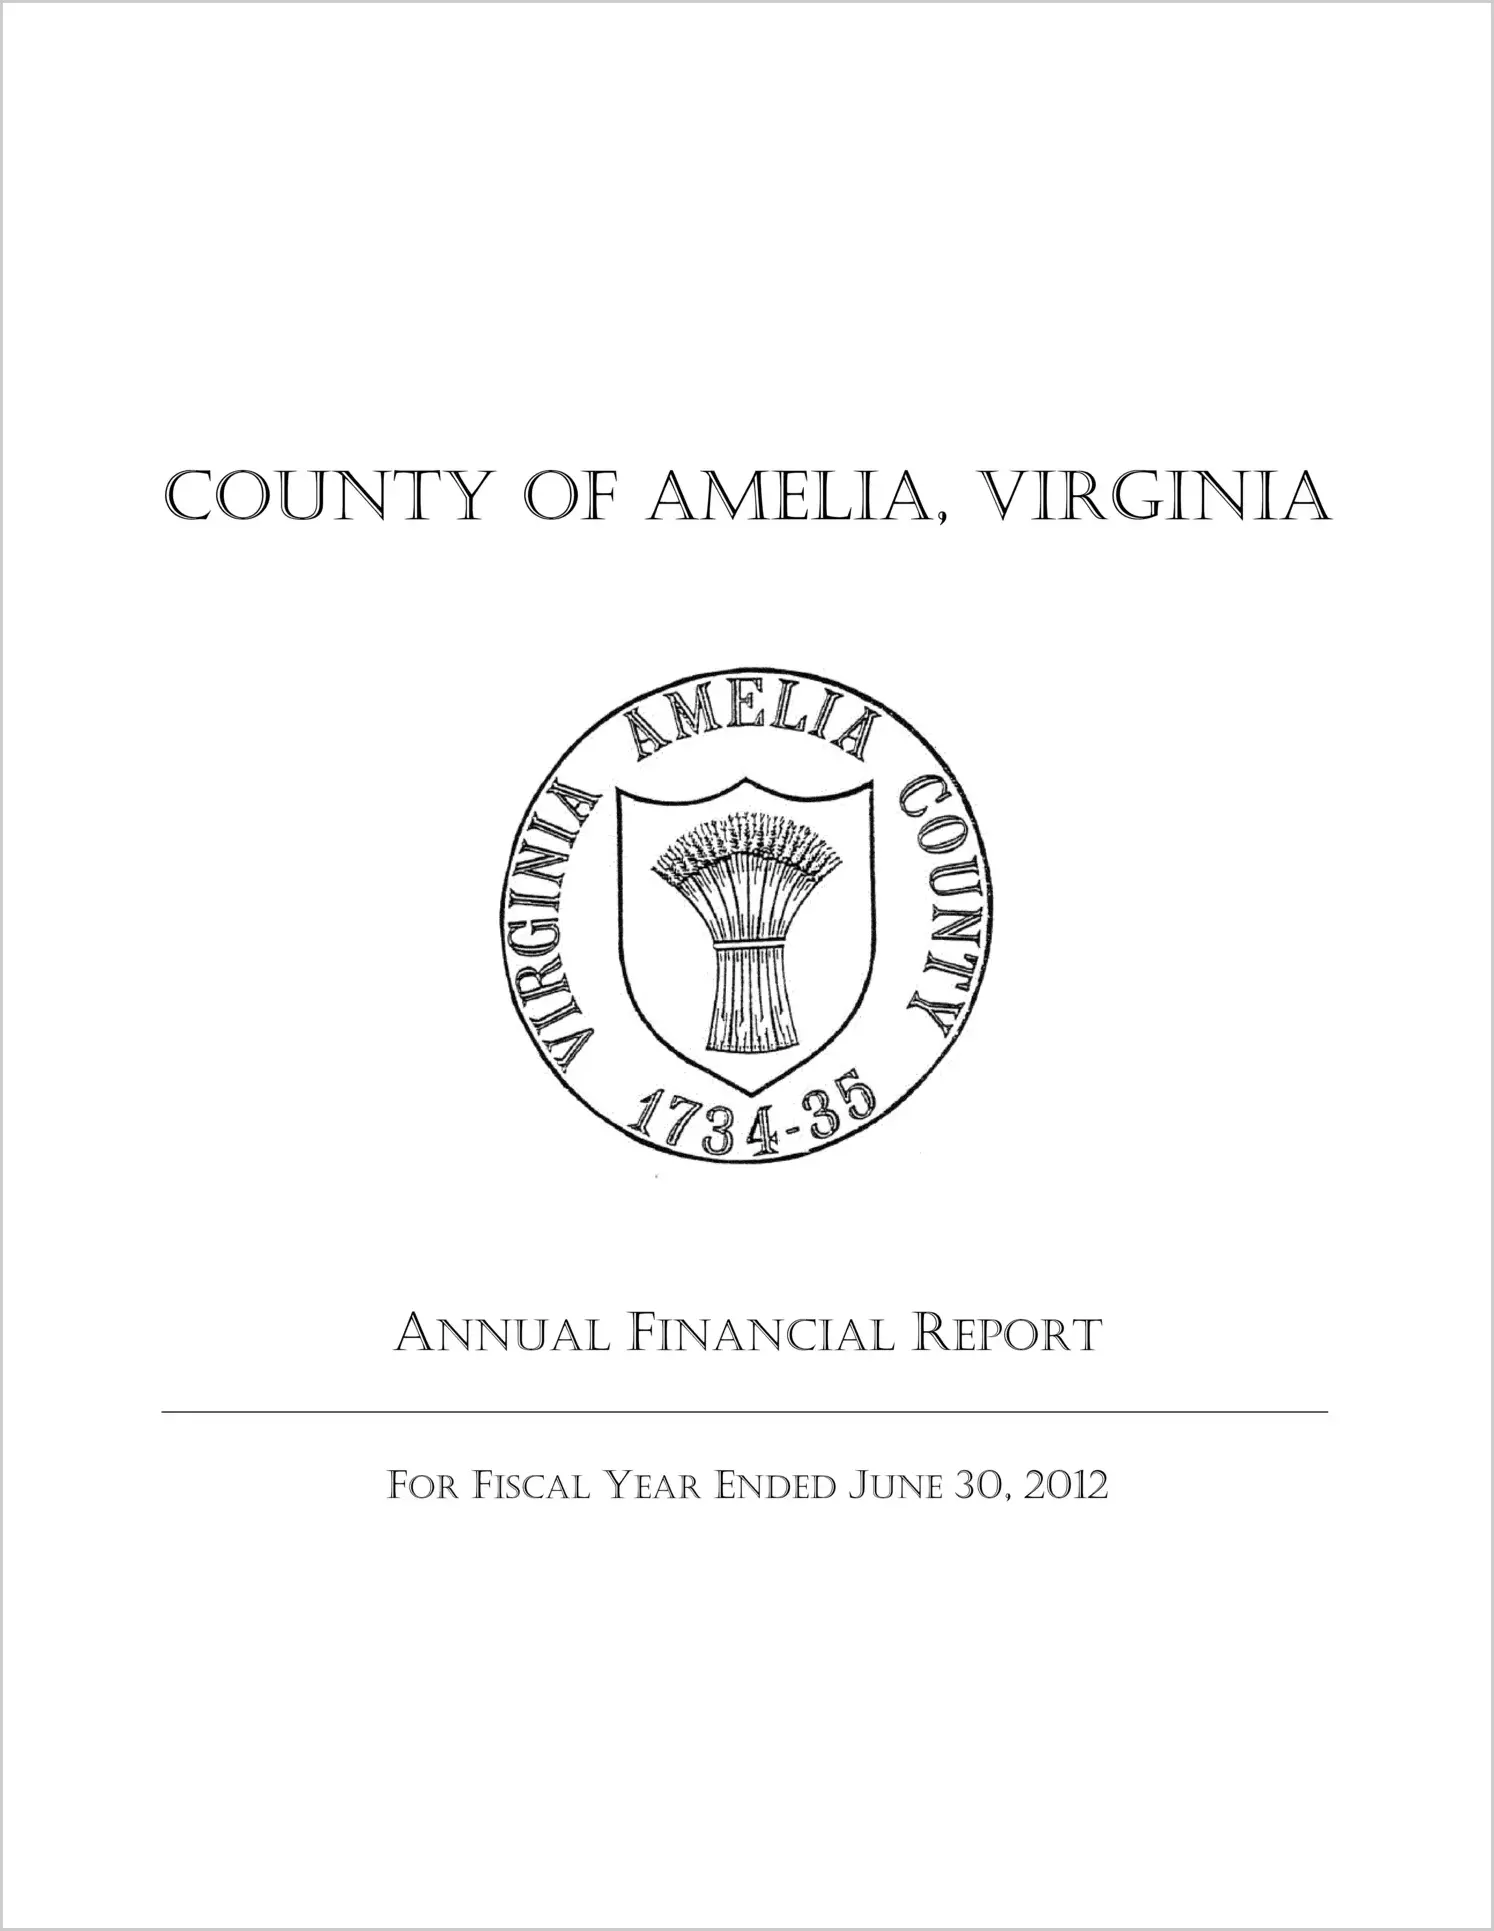 2012 Annual Financial Report for County of Amelia